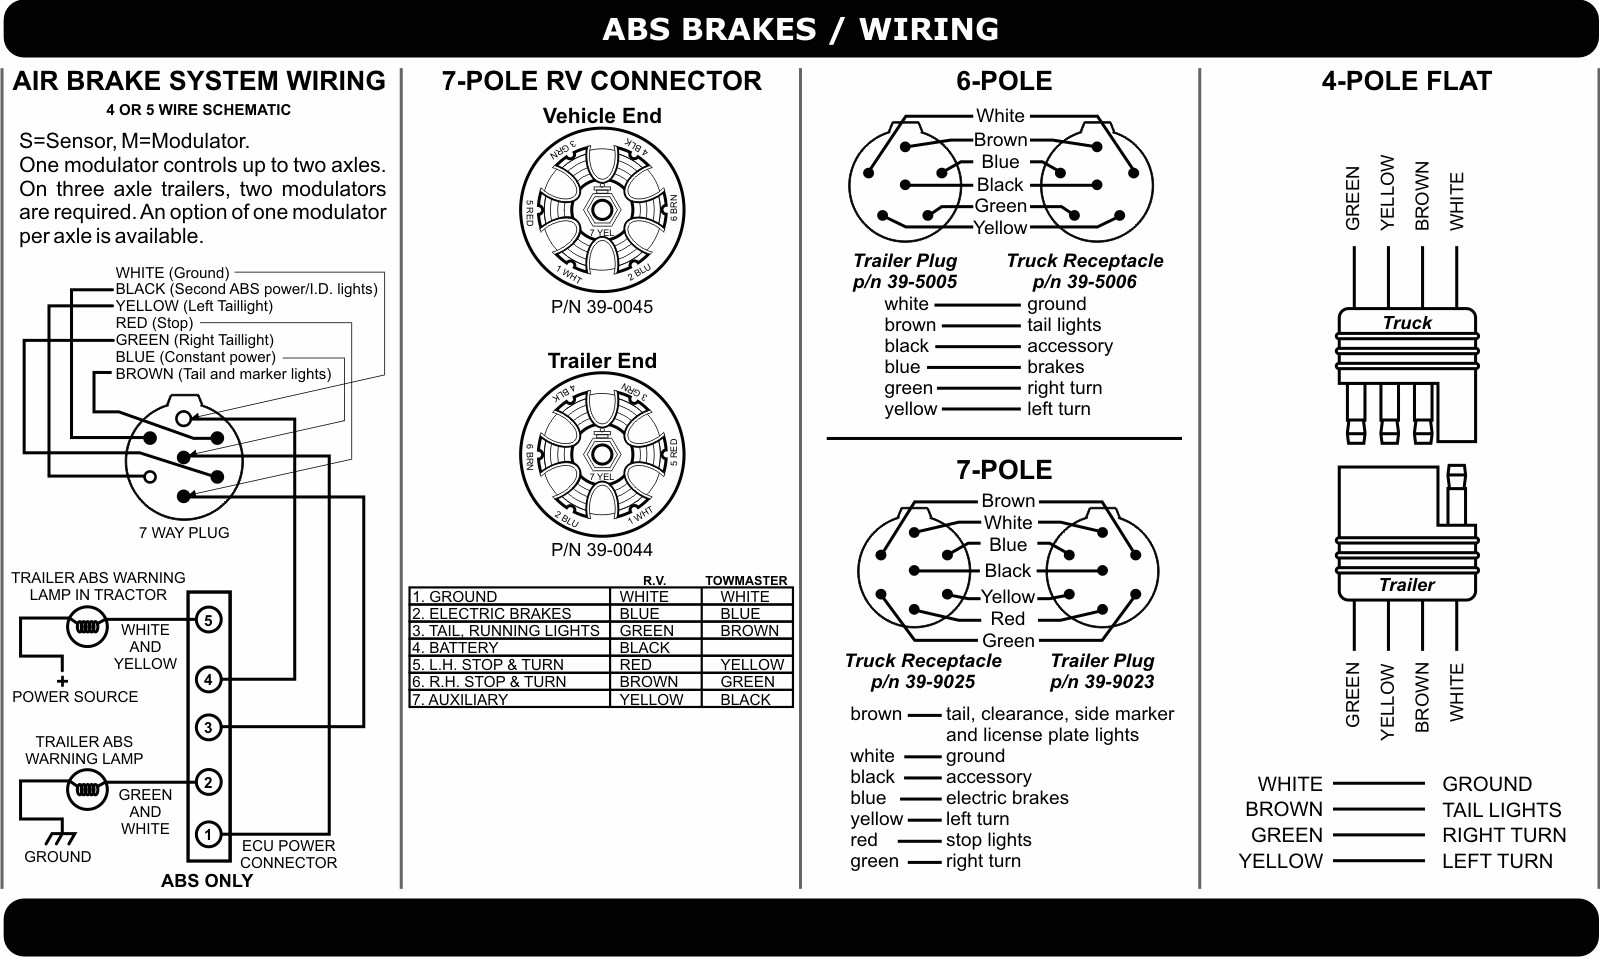 Wiring Towmaster Trailers New Trailer Wire Diagram